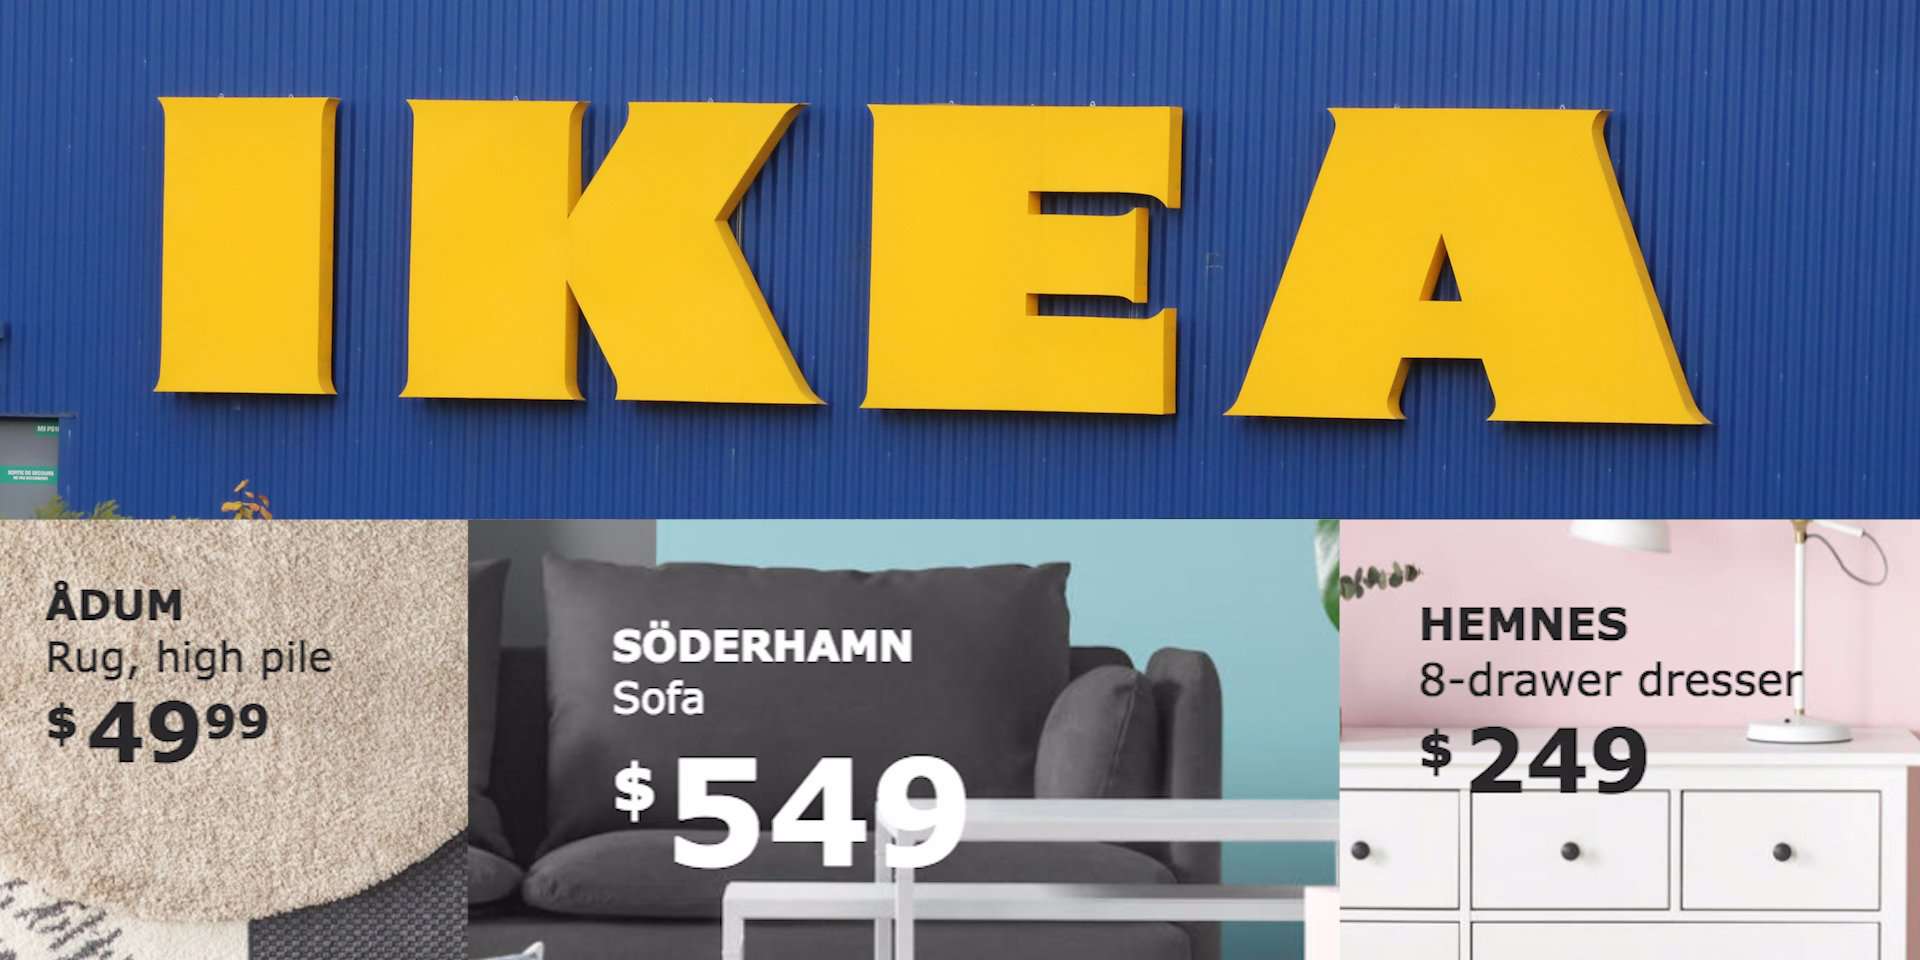 Taboola Ad Example 62862 - Here's The Meaning Behind All Of Those Obscure IKEA Product Names